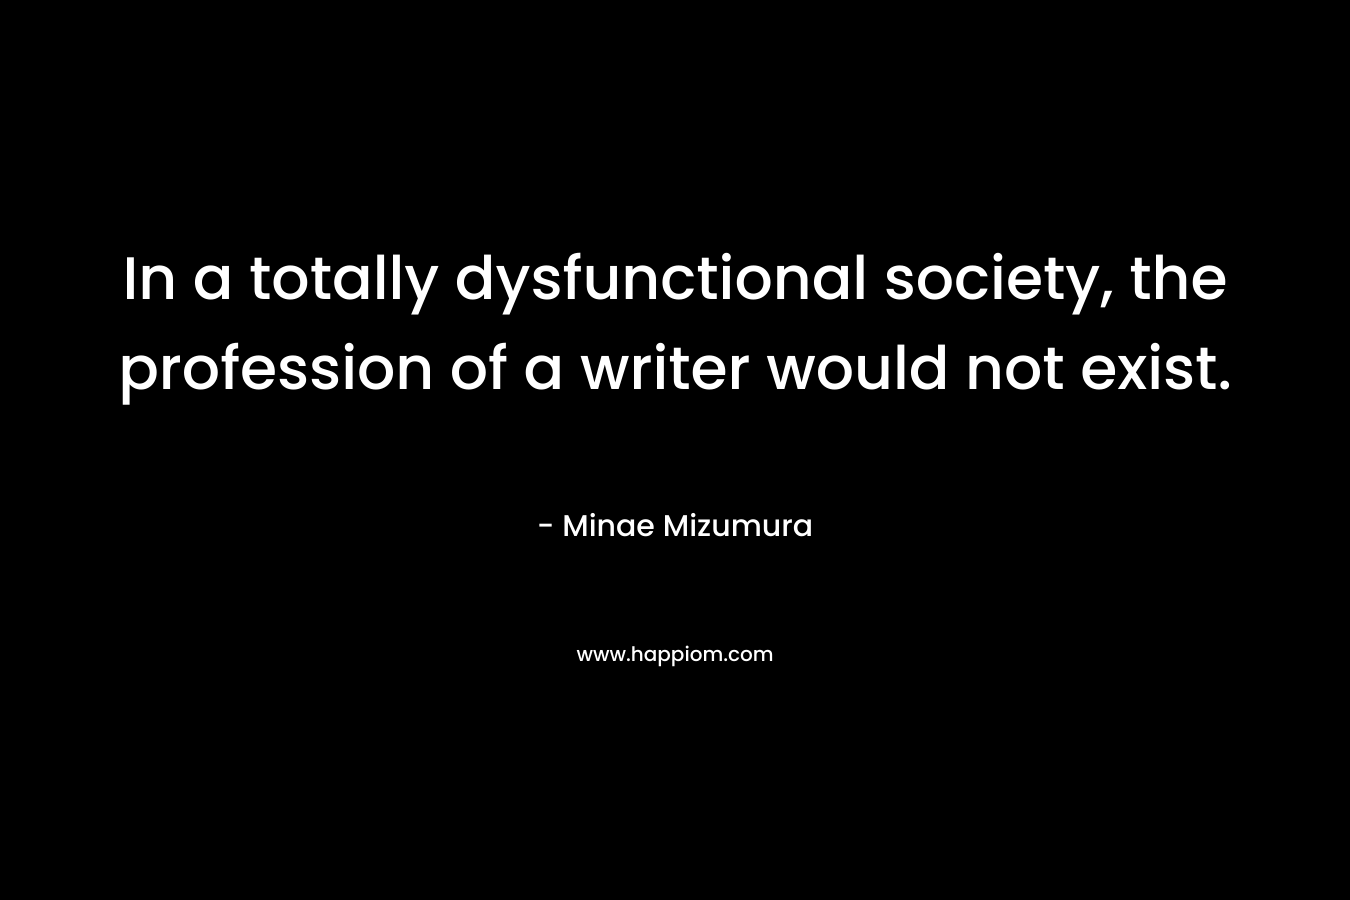 In a totally dysfunctional society, the profession of a writer would not exist. – Minae Mizumura